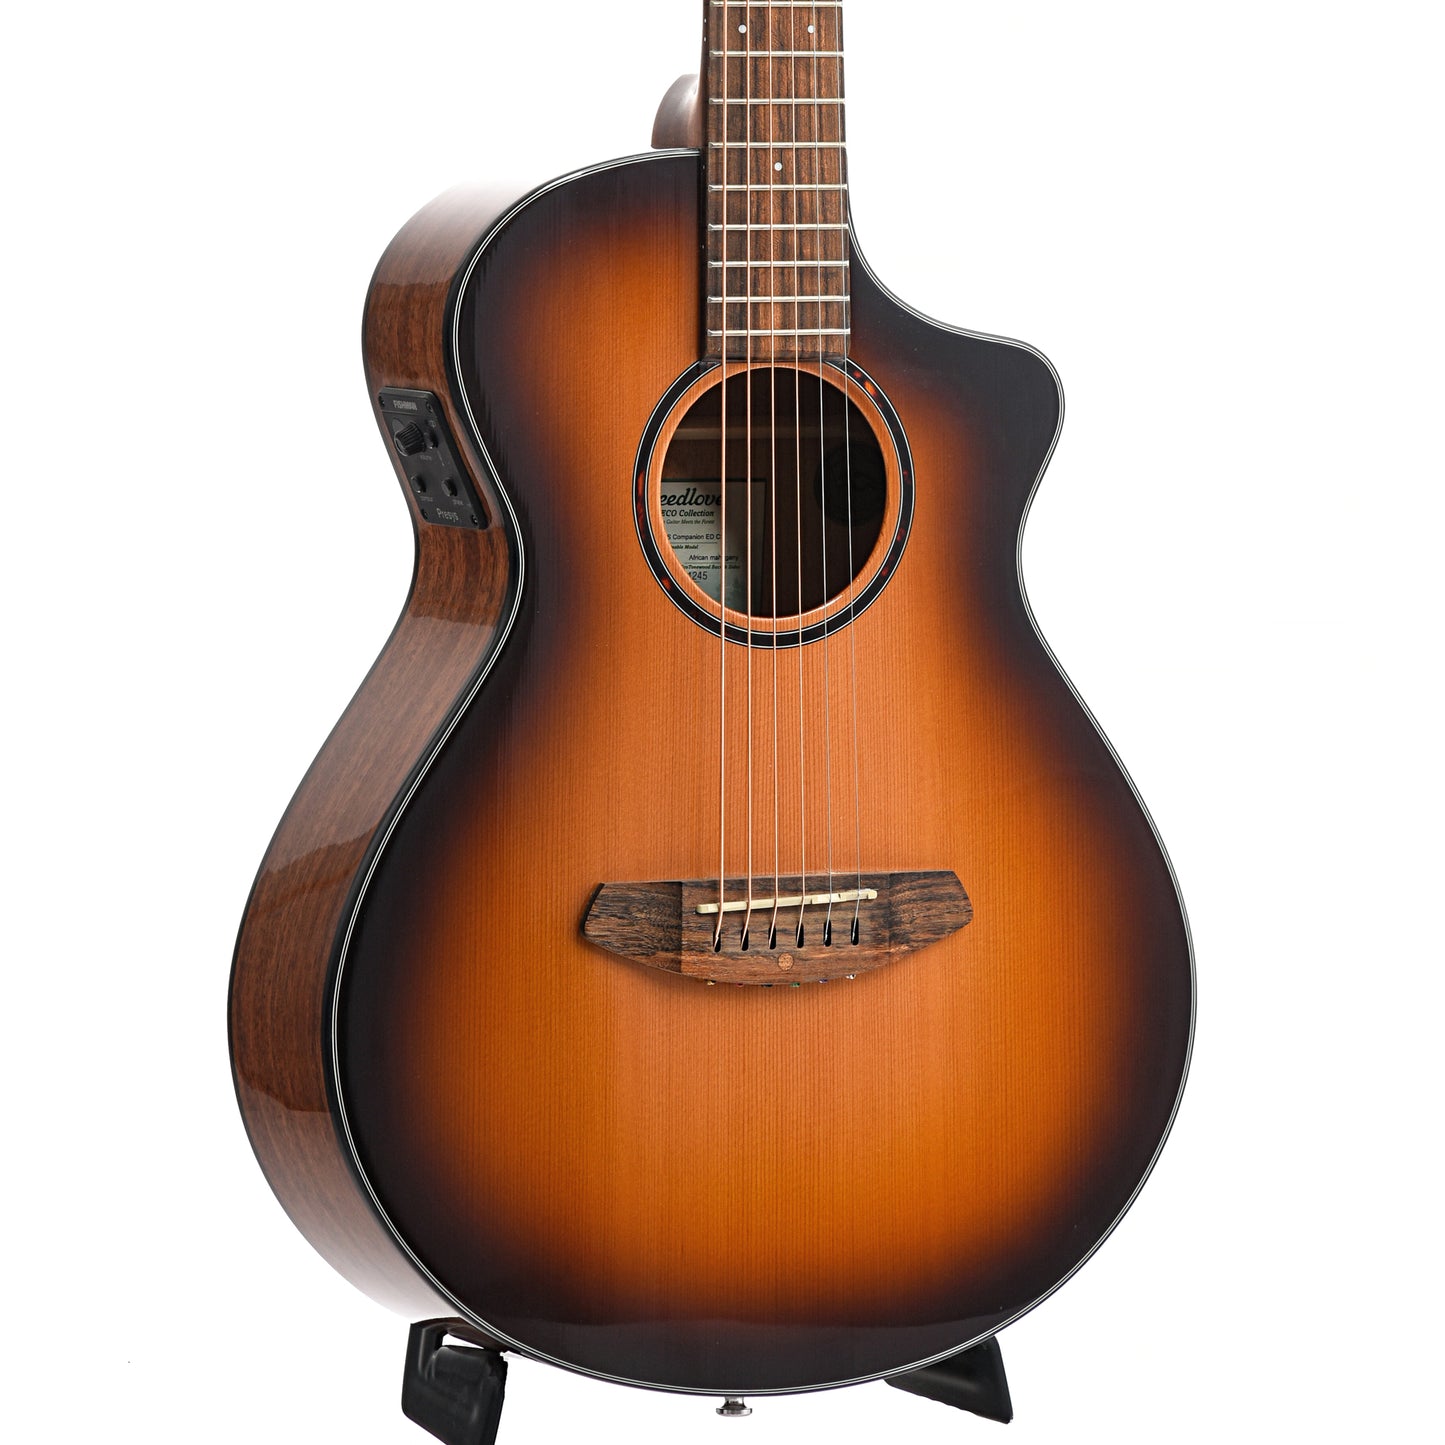 Image 6 of Breedlove Discovery S Companion Edgeburst CE Red Cedar-African Mahogany Acoustic-Electric Guitar - SKU# DSCP44CERCAM : Product Type Flat-top Guitars : Elderly Instruments